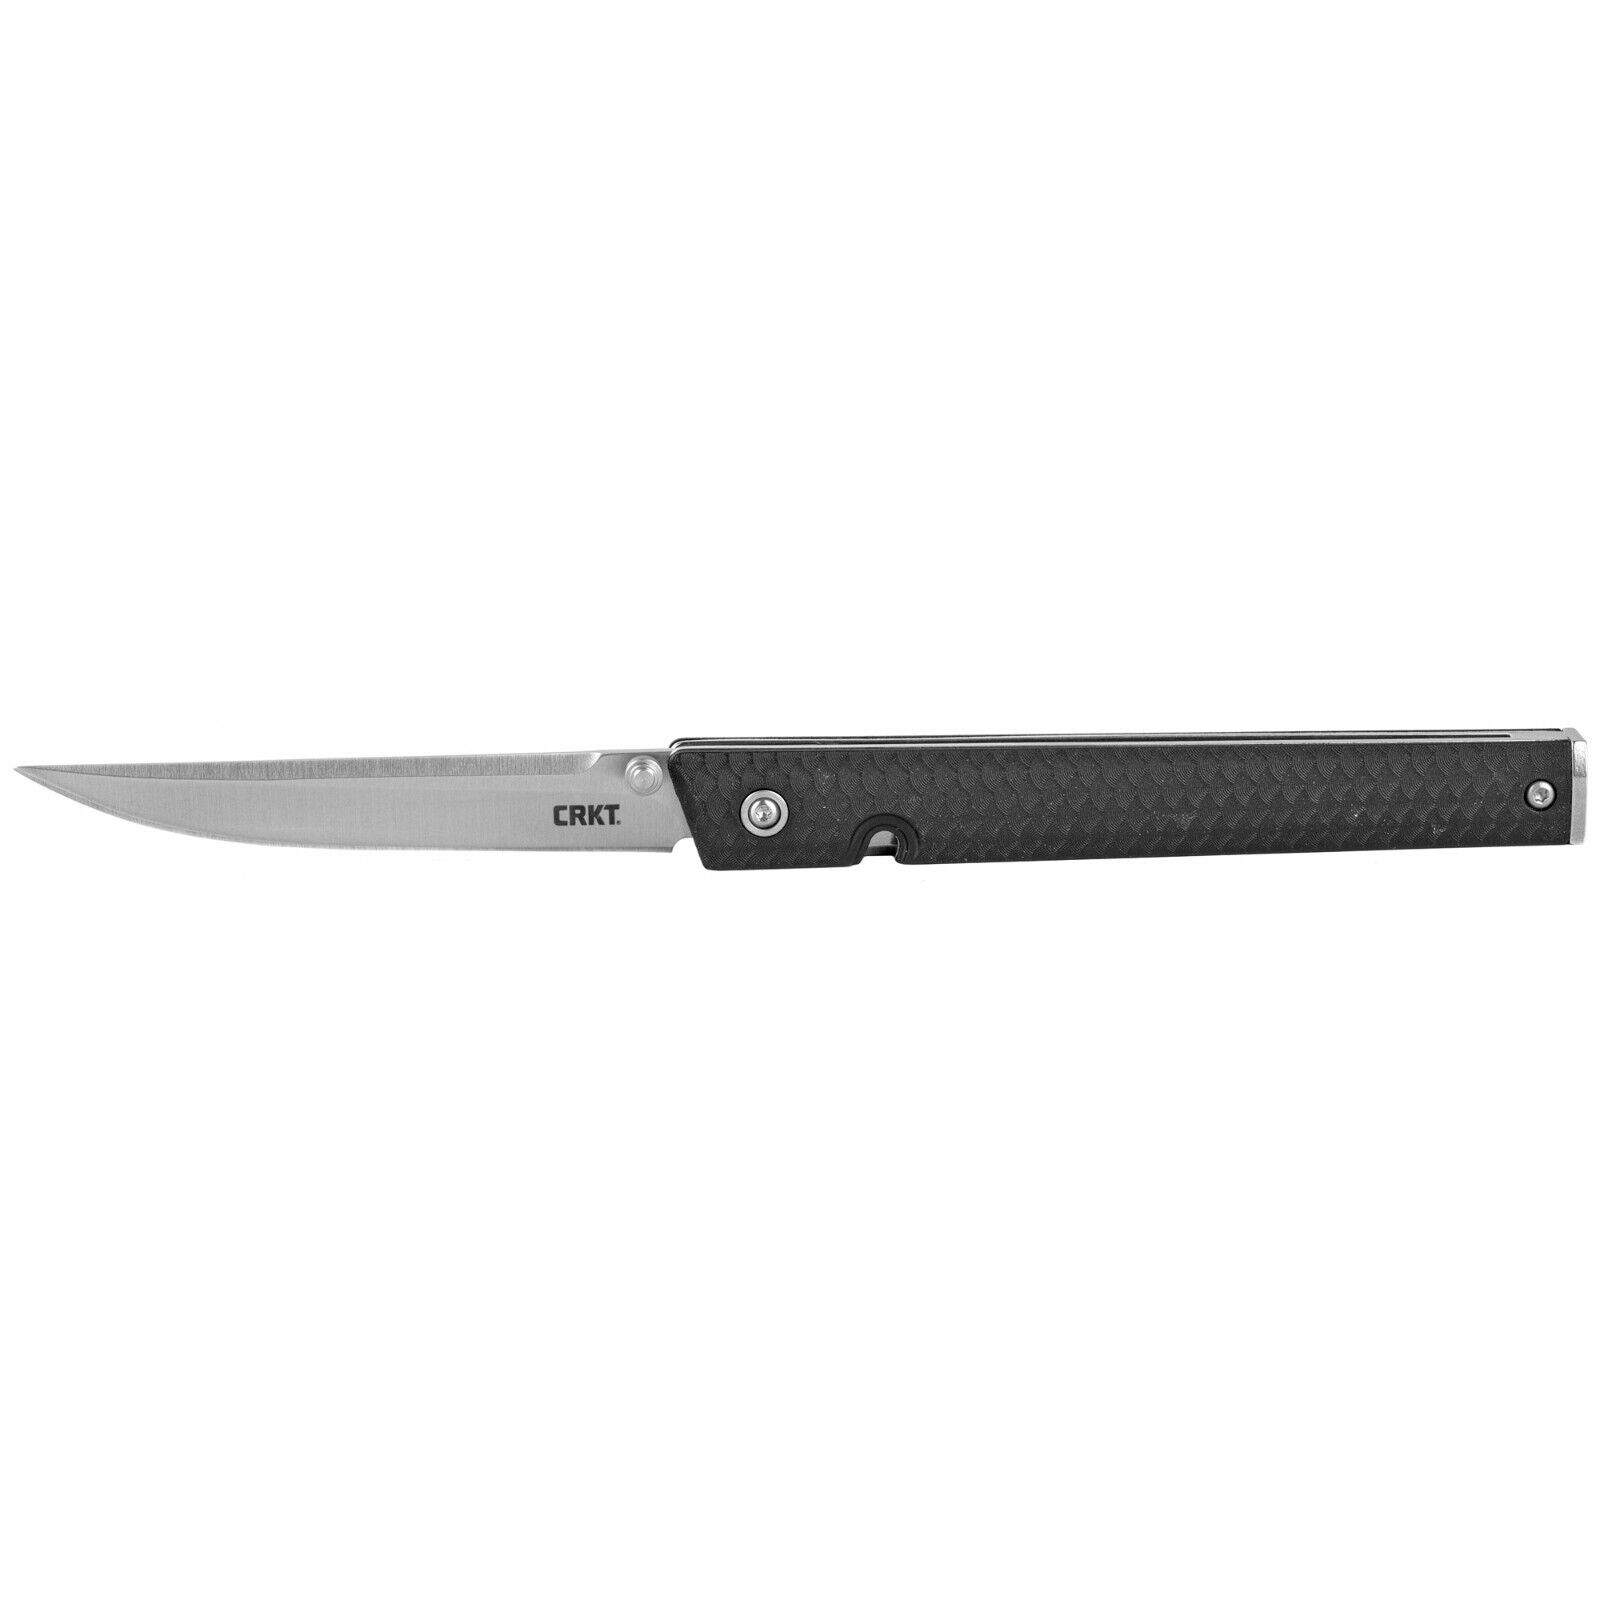 NEW Columbia River Knife & Tool, CEO, 3.11" Folding Knife w/Locking Liner, 7096